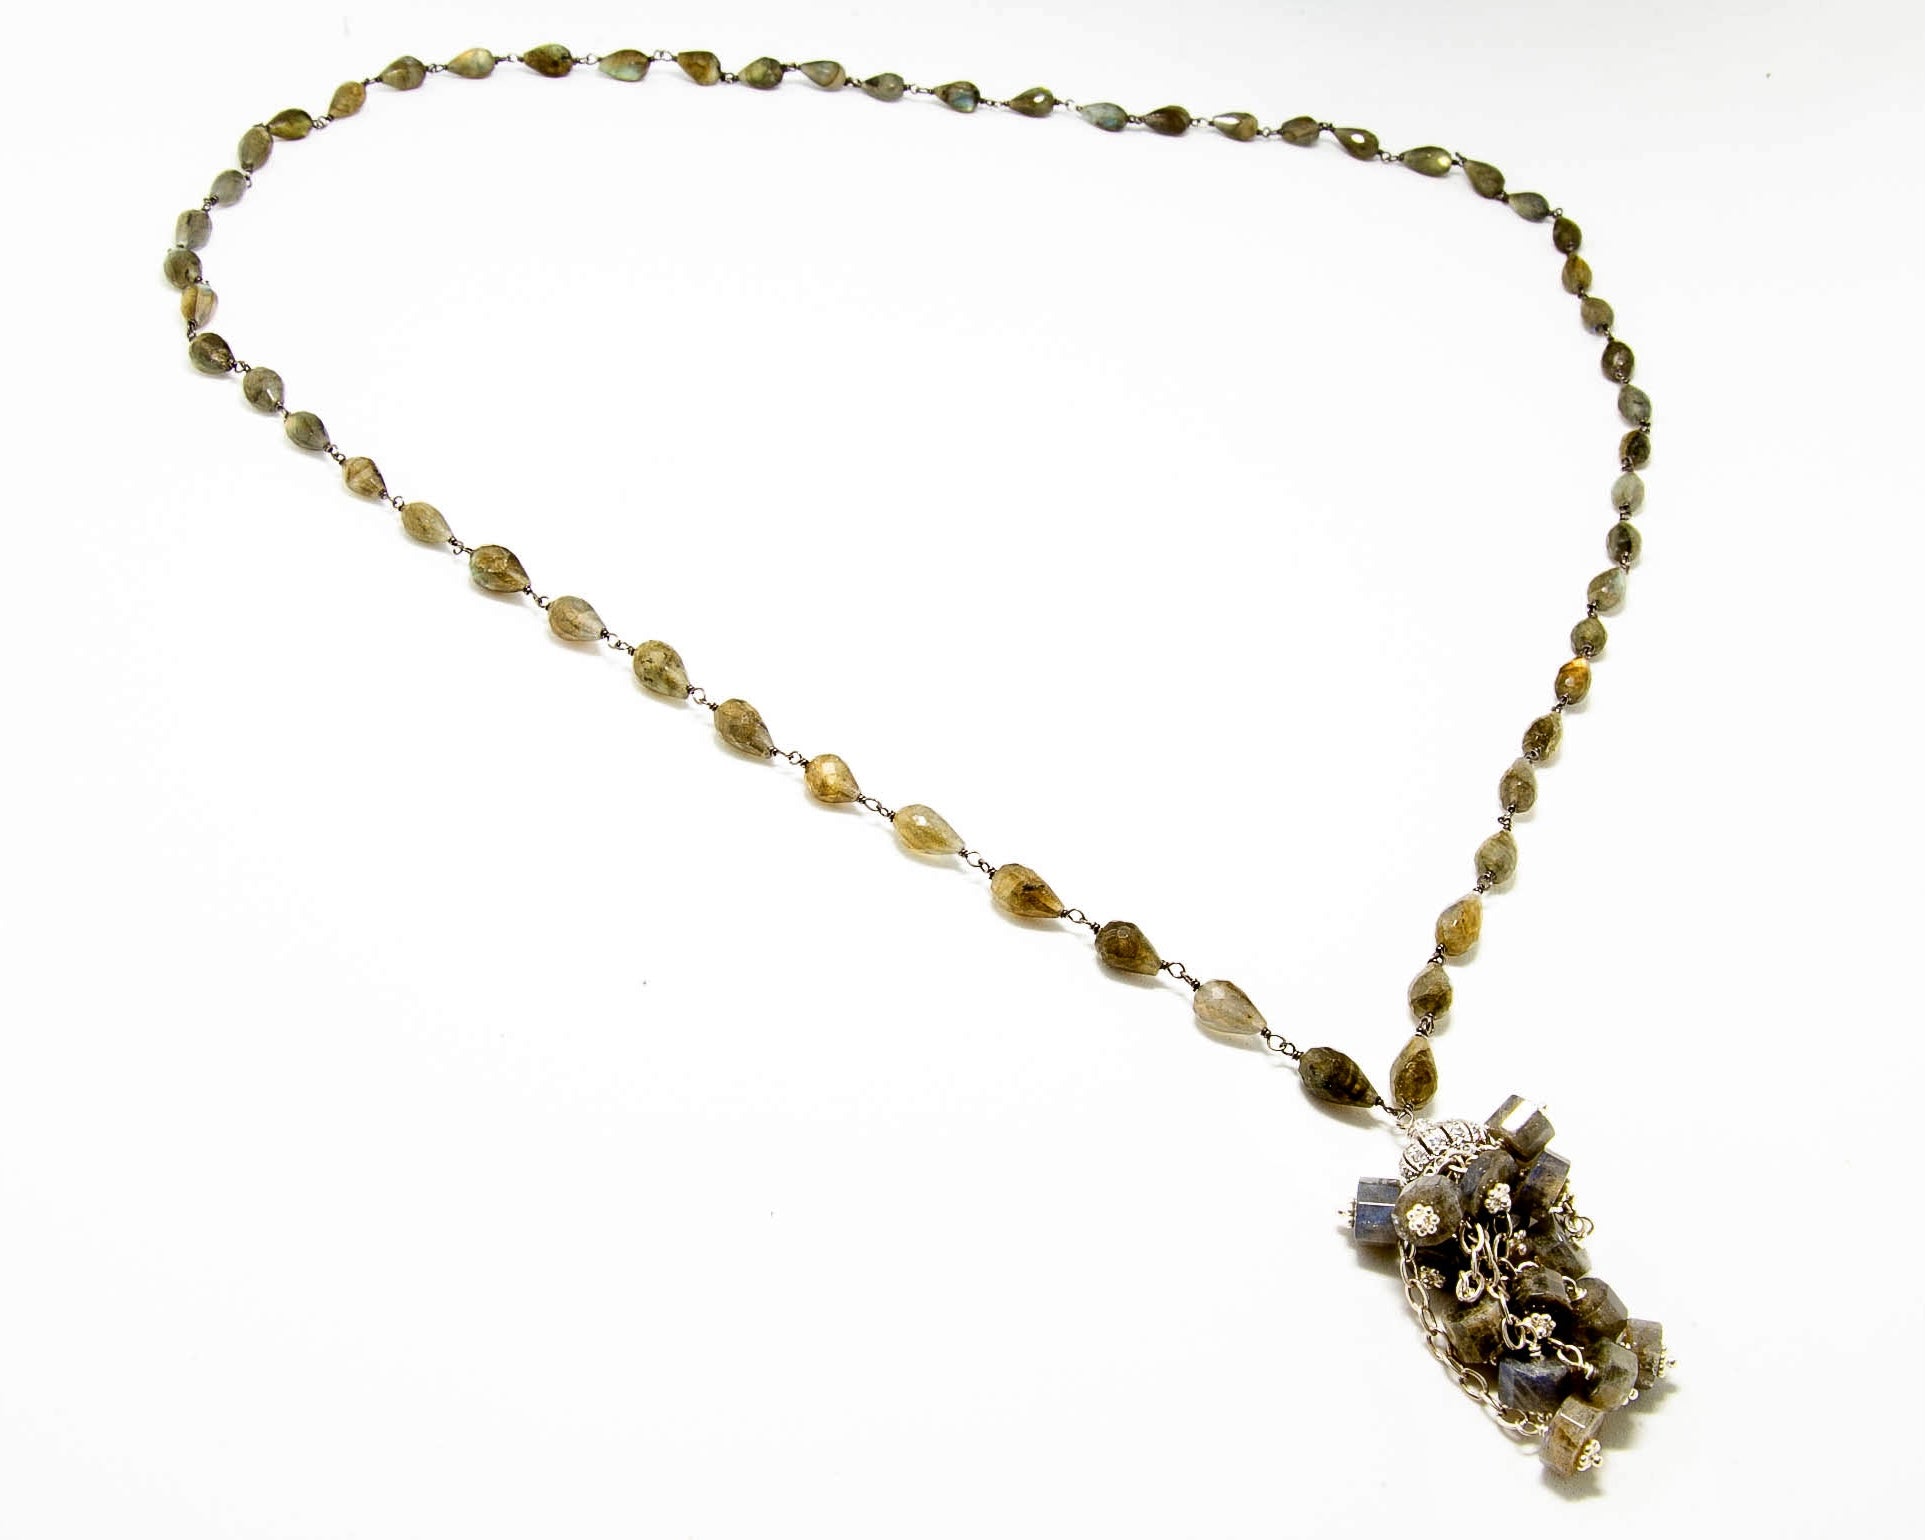 Pear shaped Labradorite Stones with crystal cap on the tassel of this 36 inch necklace.